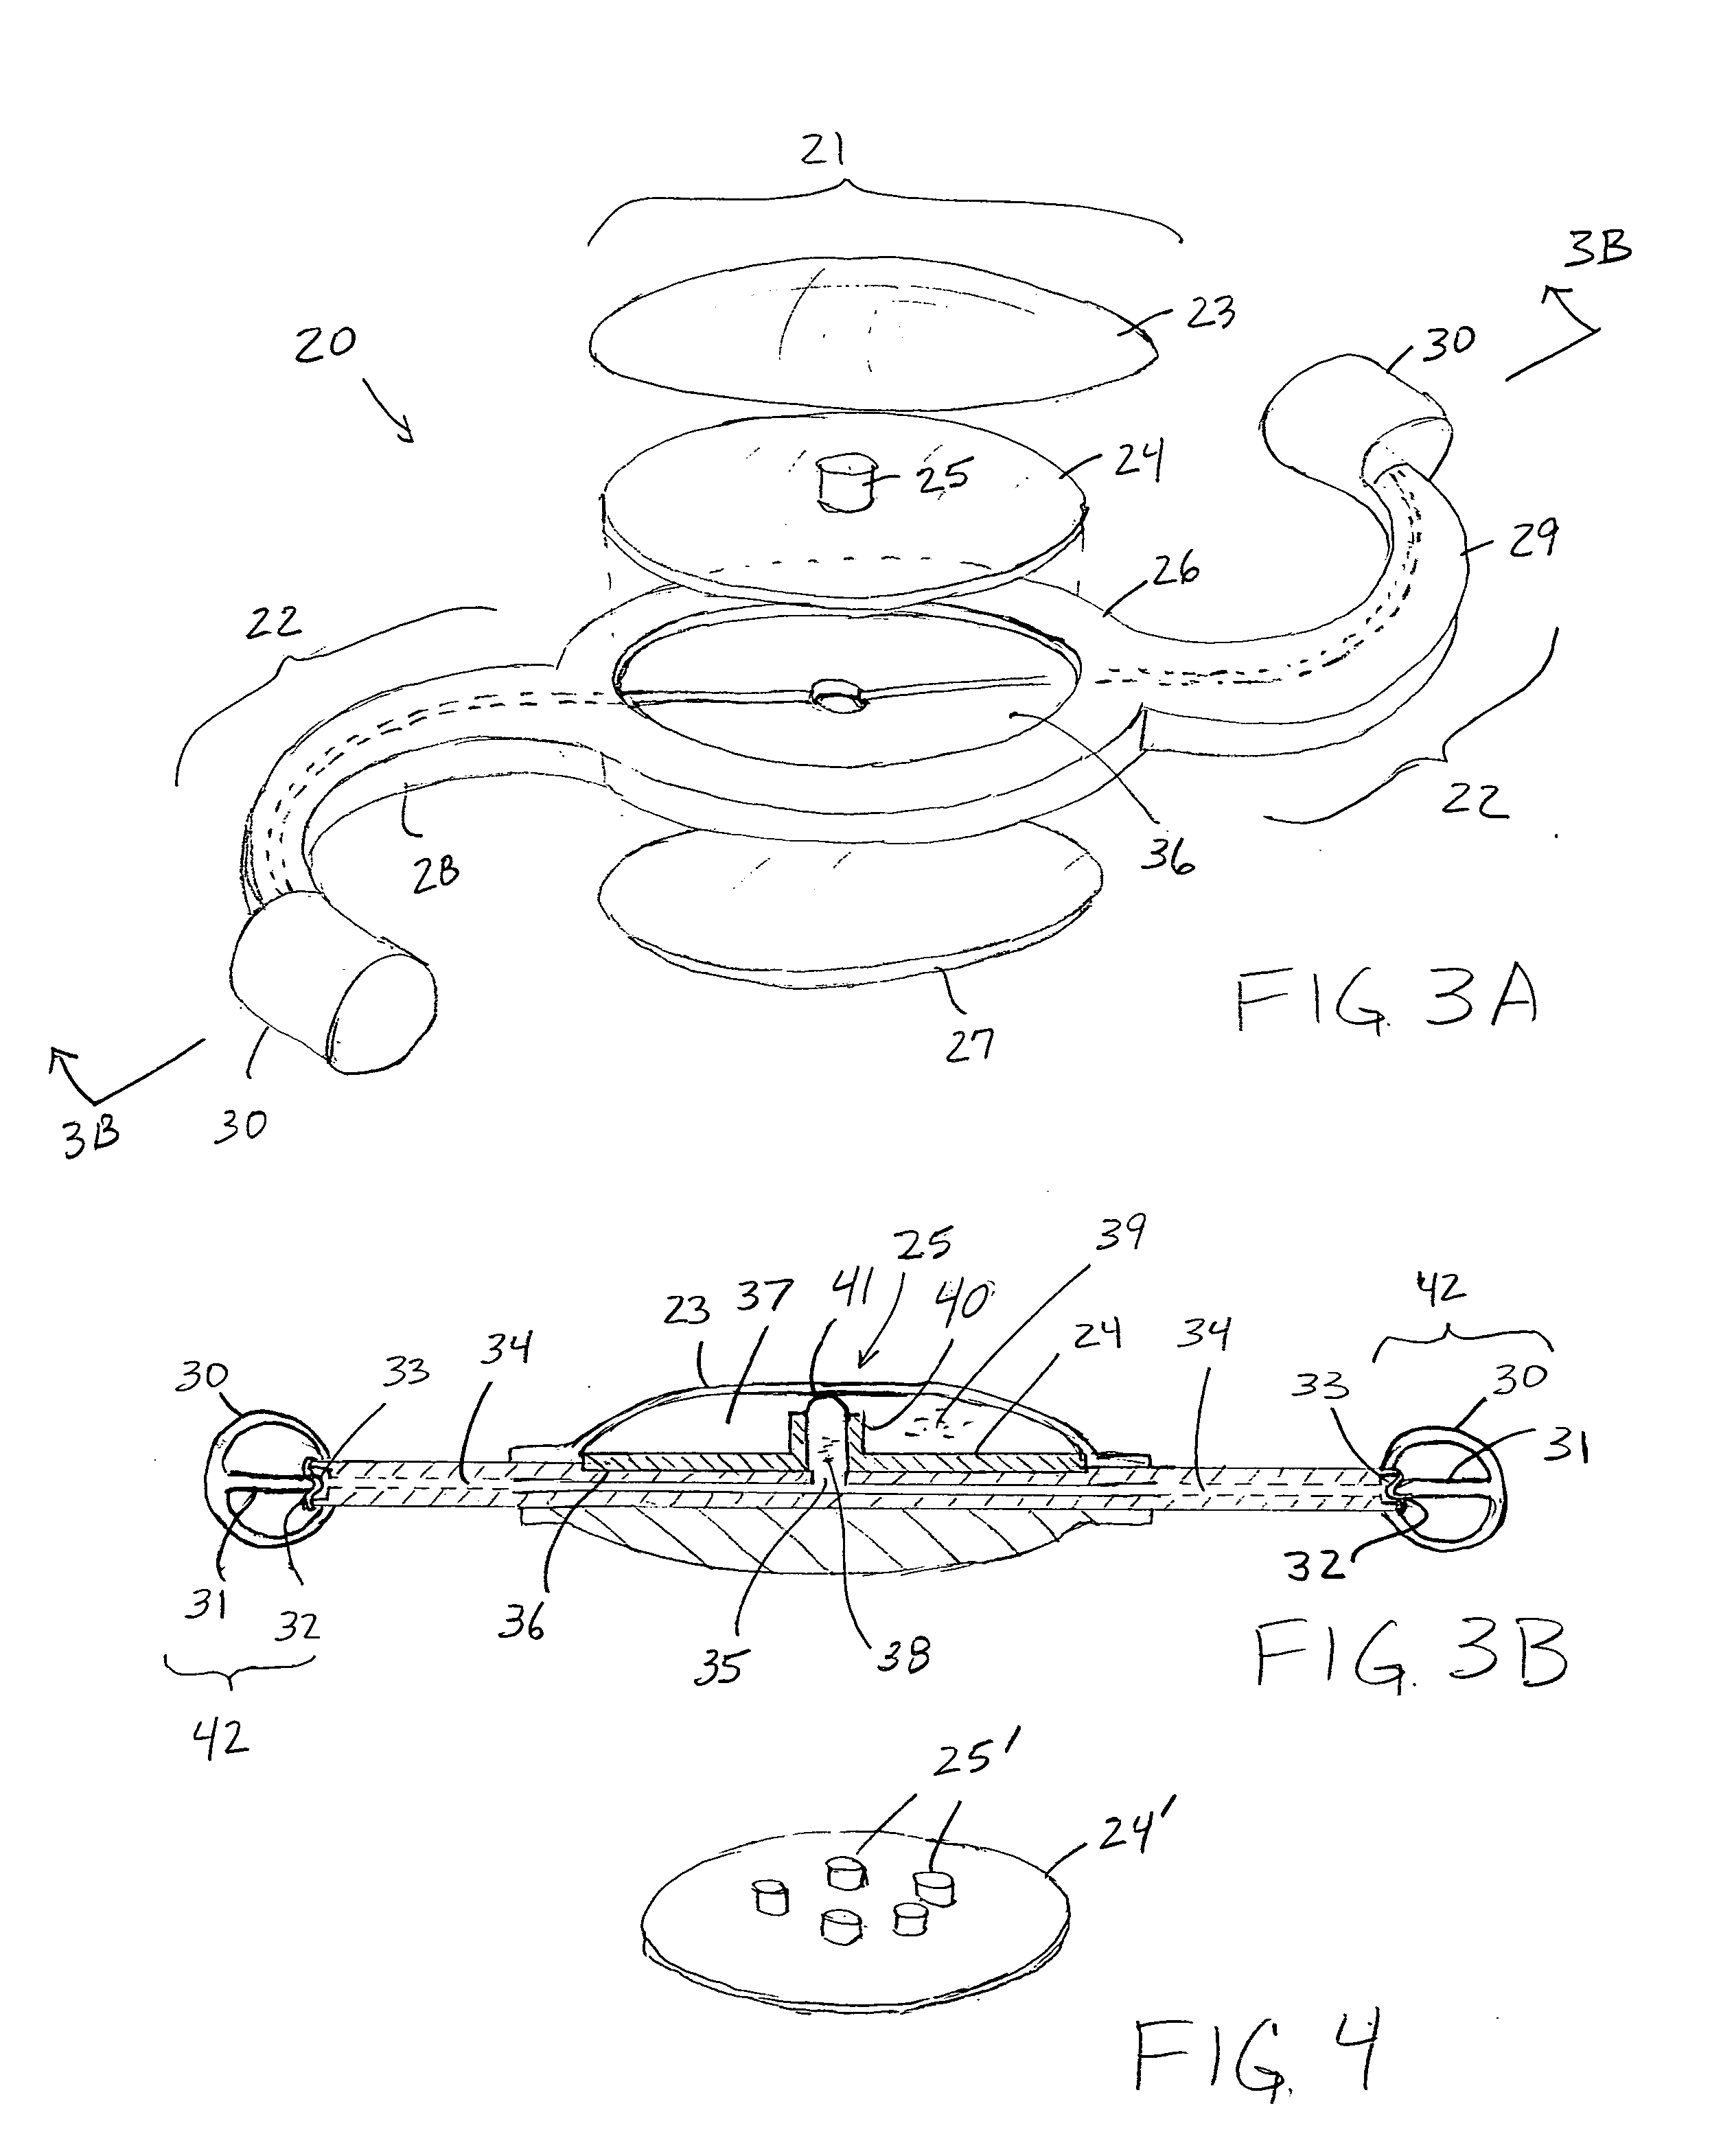 Accommodating intraocular lens system and method